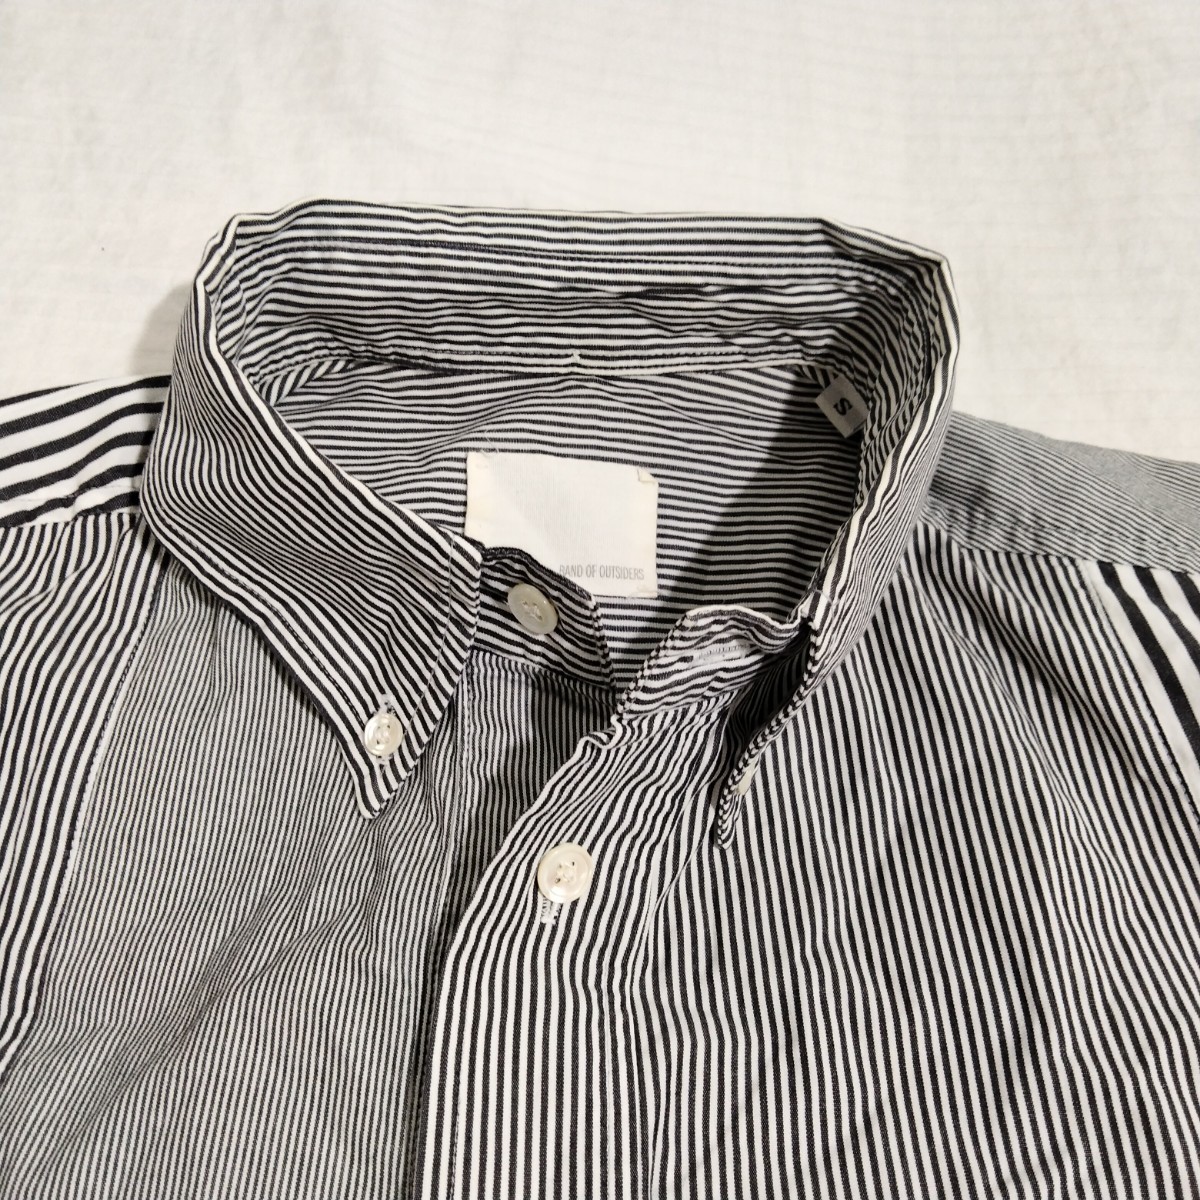 Band Of Outsiders band ob out rhinoceros da-zs pull over button down BD short sleeves patchwork Random stripe shirt 